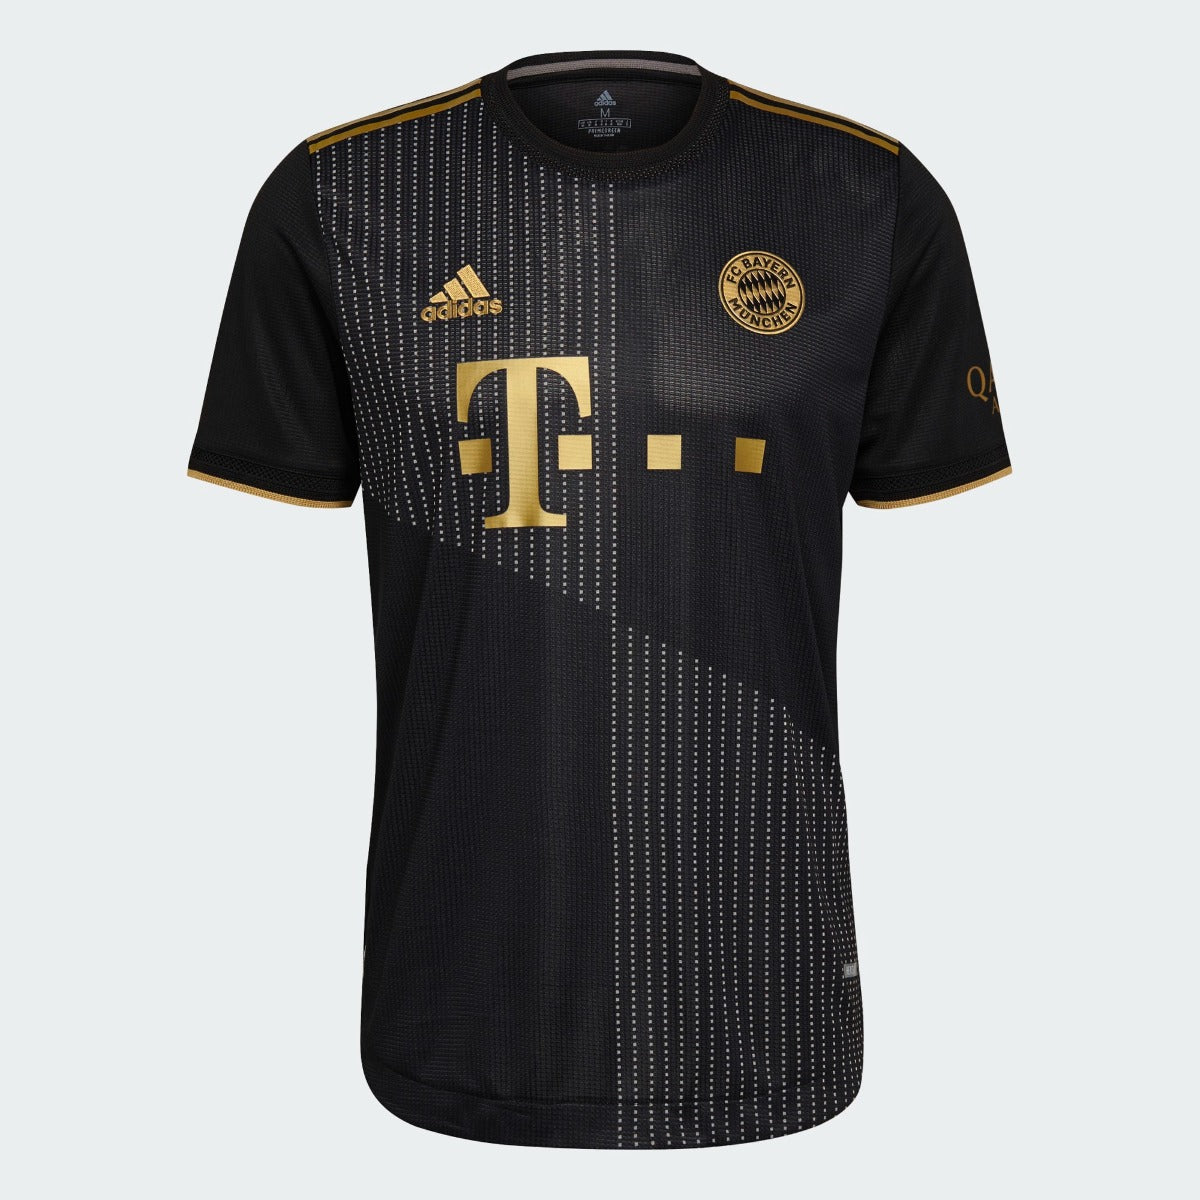 Adidas 2021-22 Bayern Munchen Authentic Away Jersey - Black-Gold (Front)